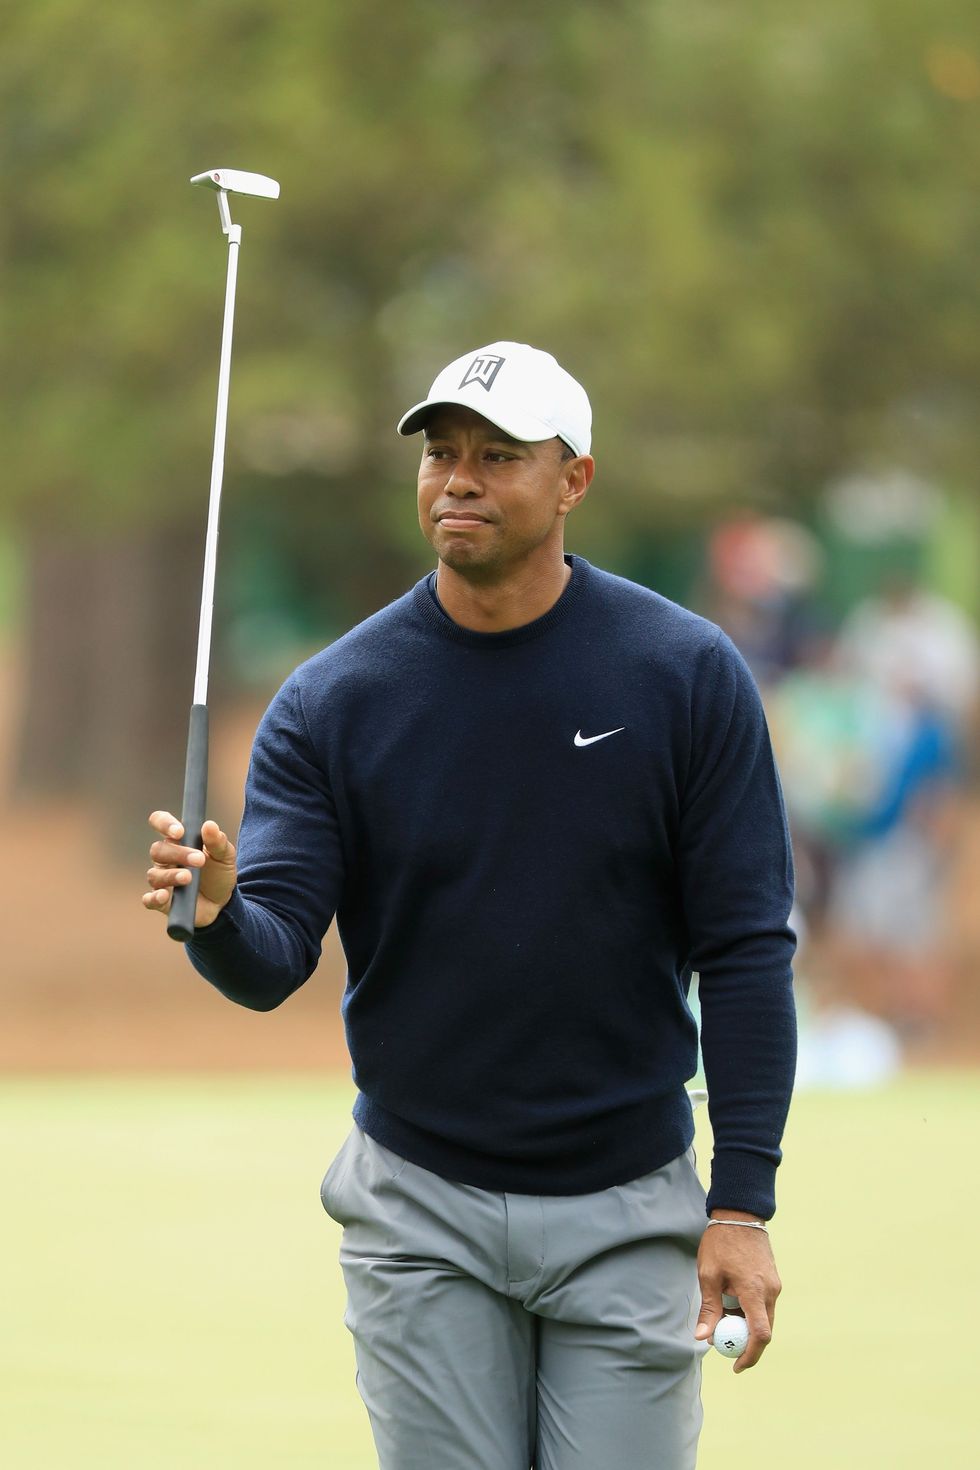 John Granato: Golf is just fine without him, but who wouldn't want Tiger back on top?